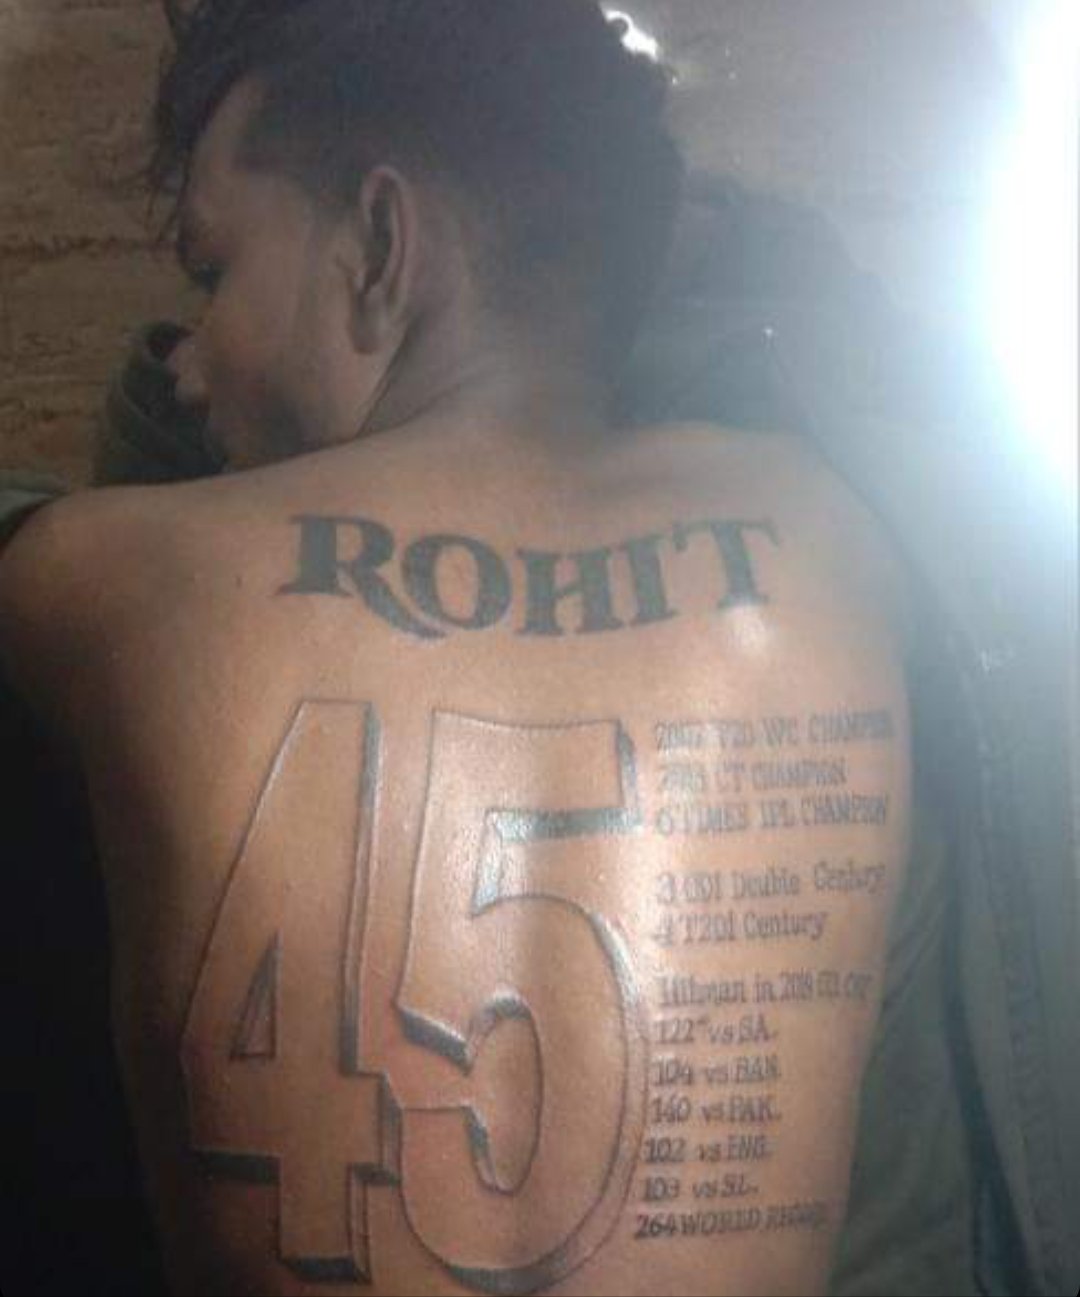 CricketMAN2 on Twitter A Rohit Sharma fan got Rohits name and his jersey  number and his records tattooed on his body  Craze of Hitman Rohit Sharma  Unbelievable httpstcoeb0tdFNERm  Twitter